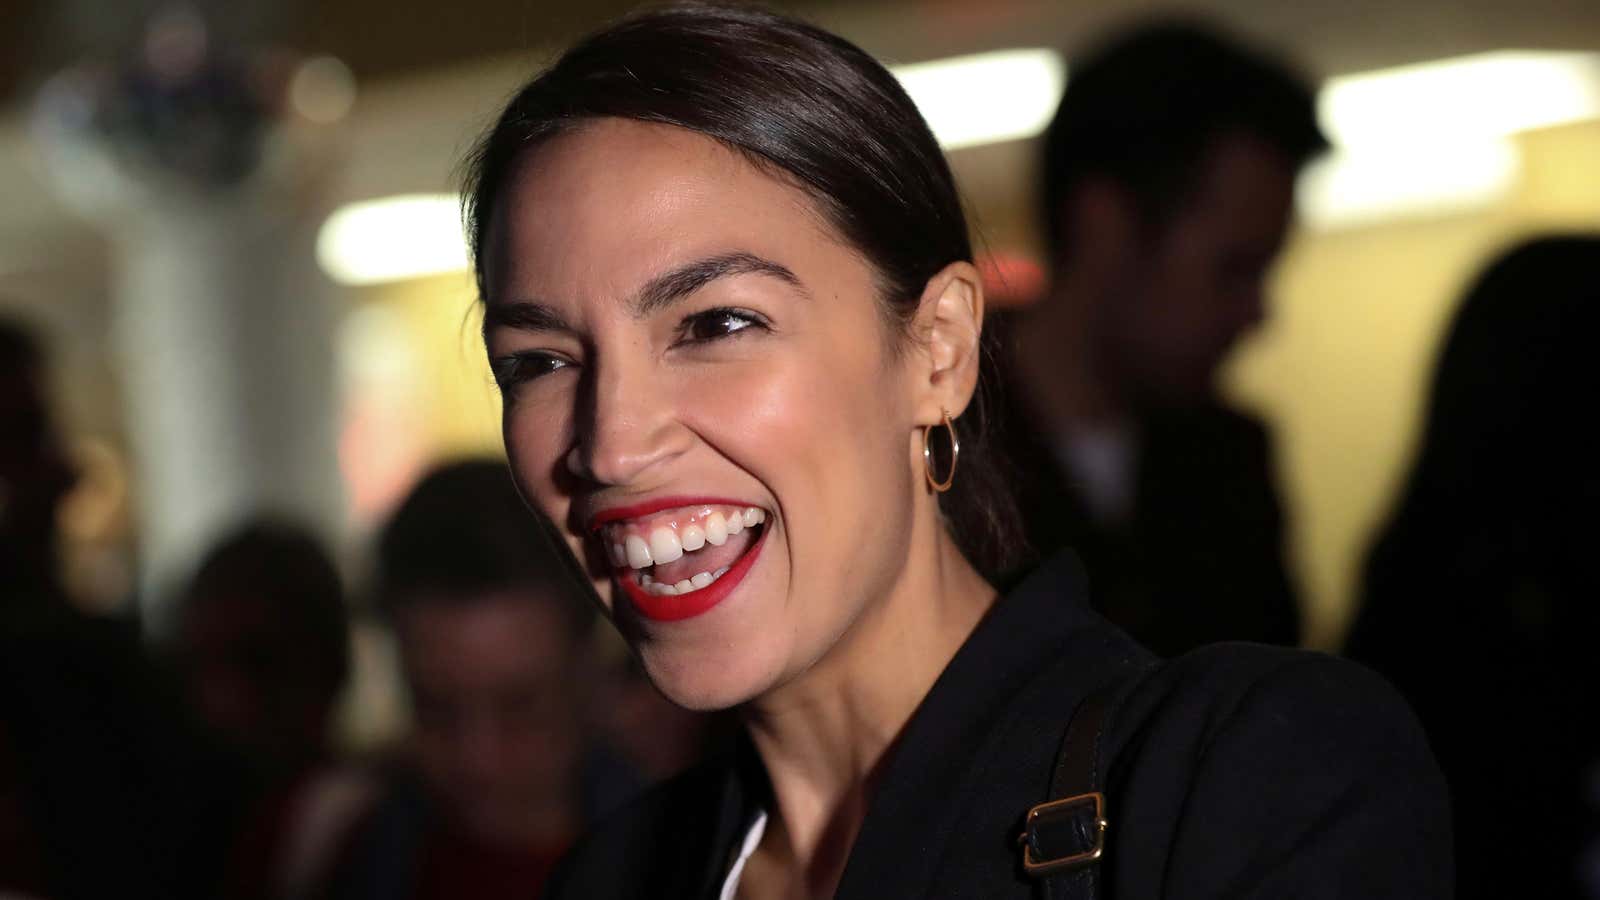 With Twitter usage, at least, Alexandria Ocasio-Cortez has some things in common with  Donald Trump.